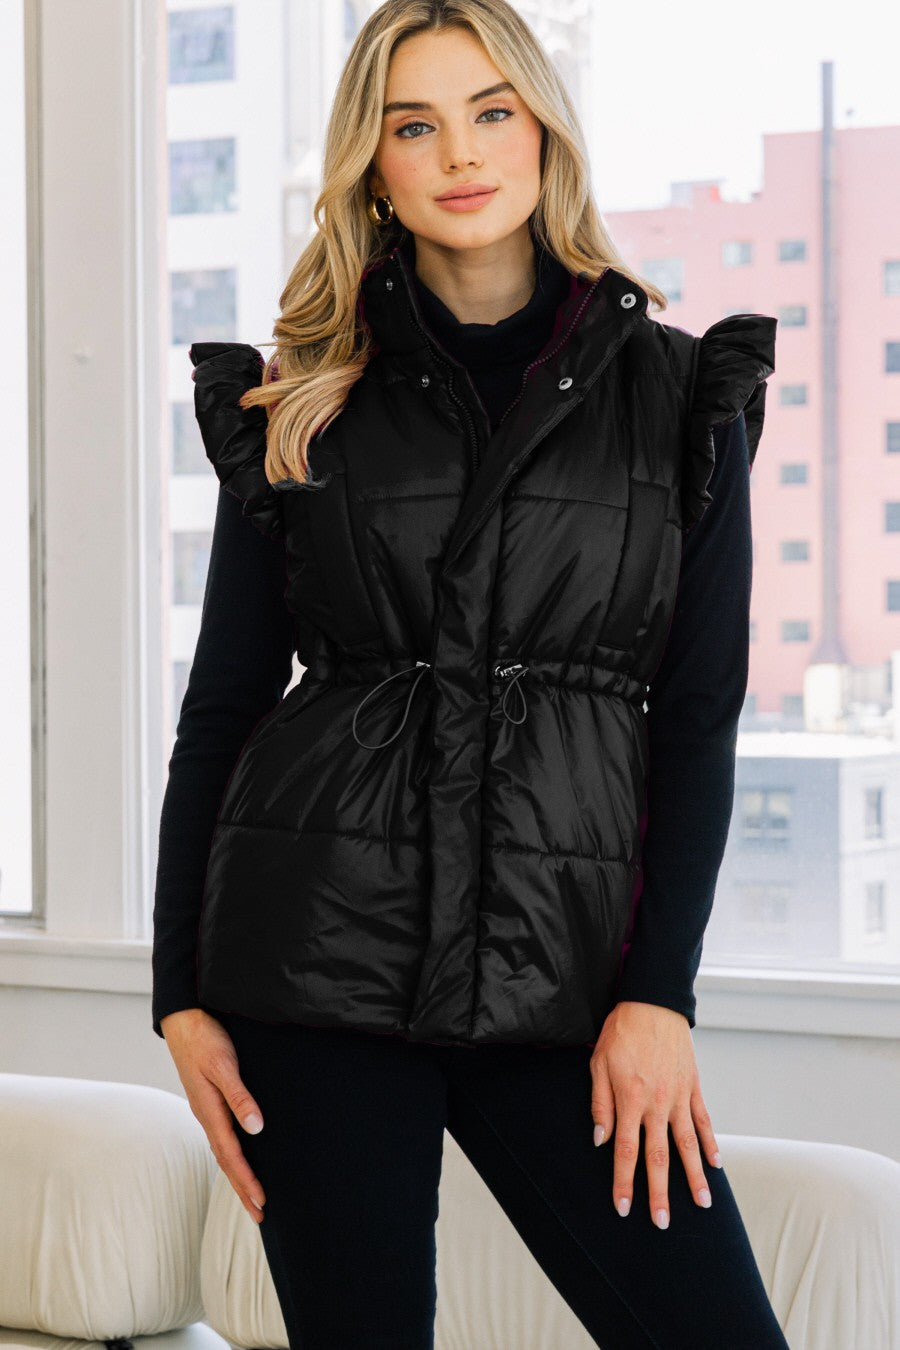 Pep in Your Step Puffer Vest - Black